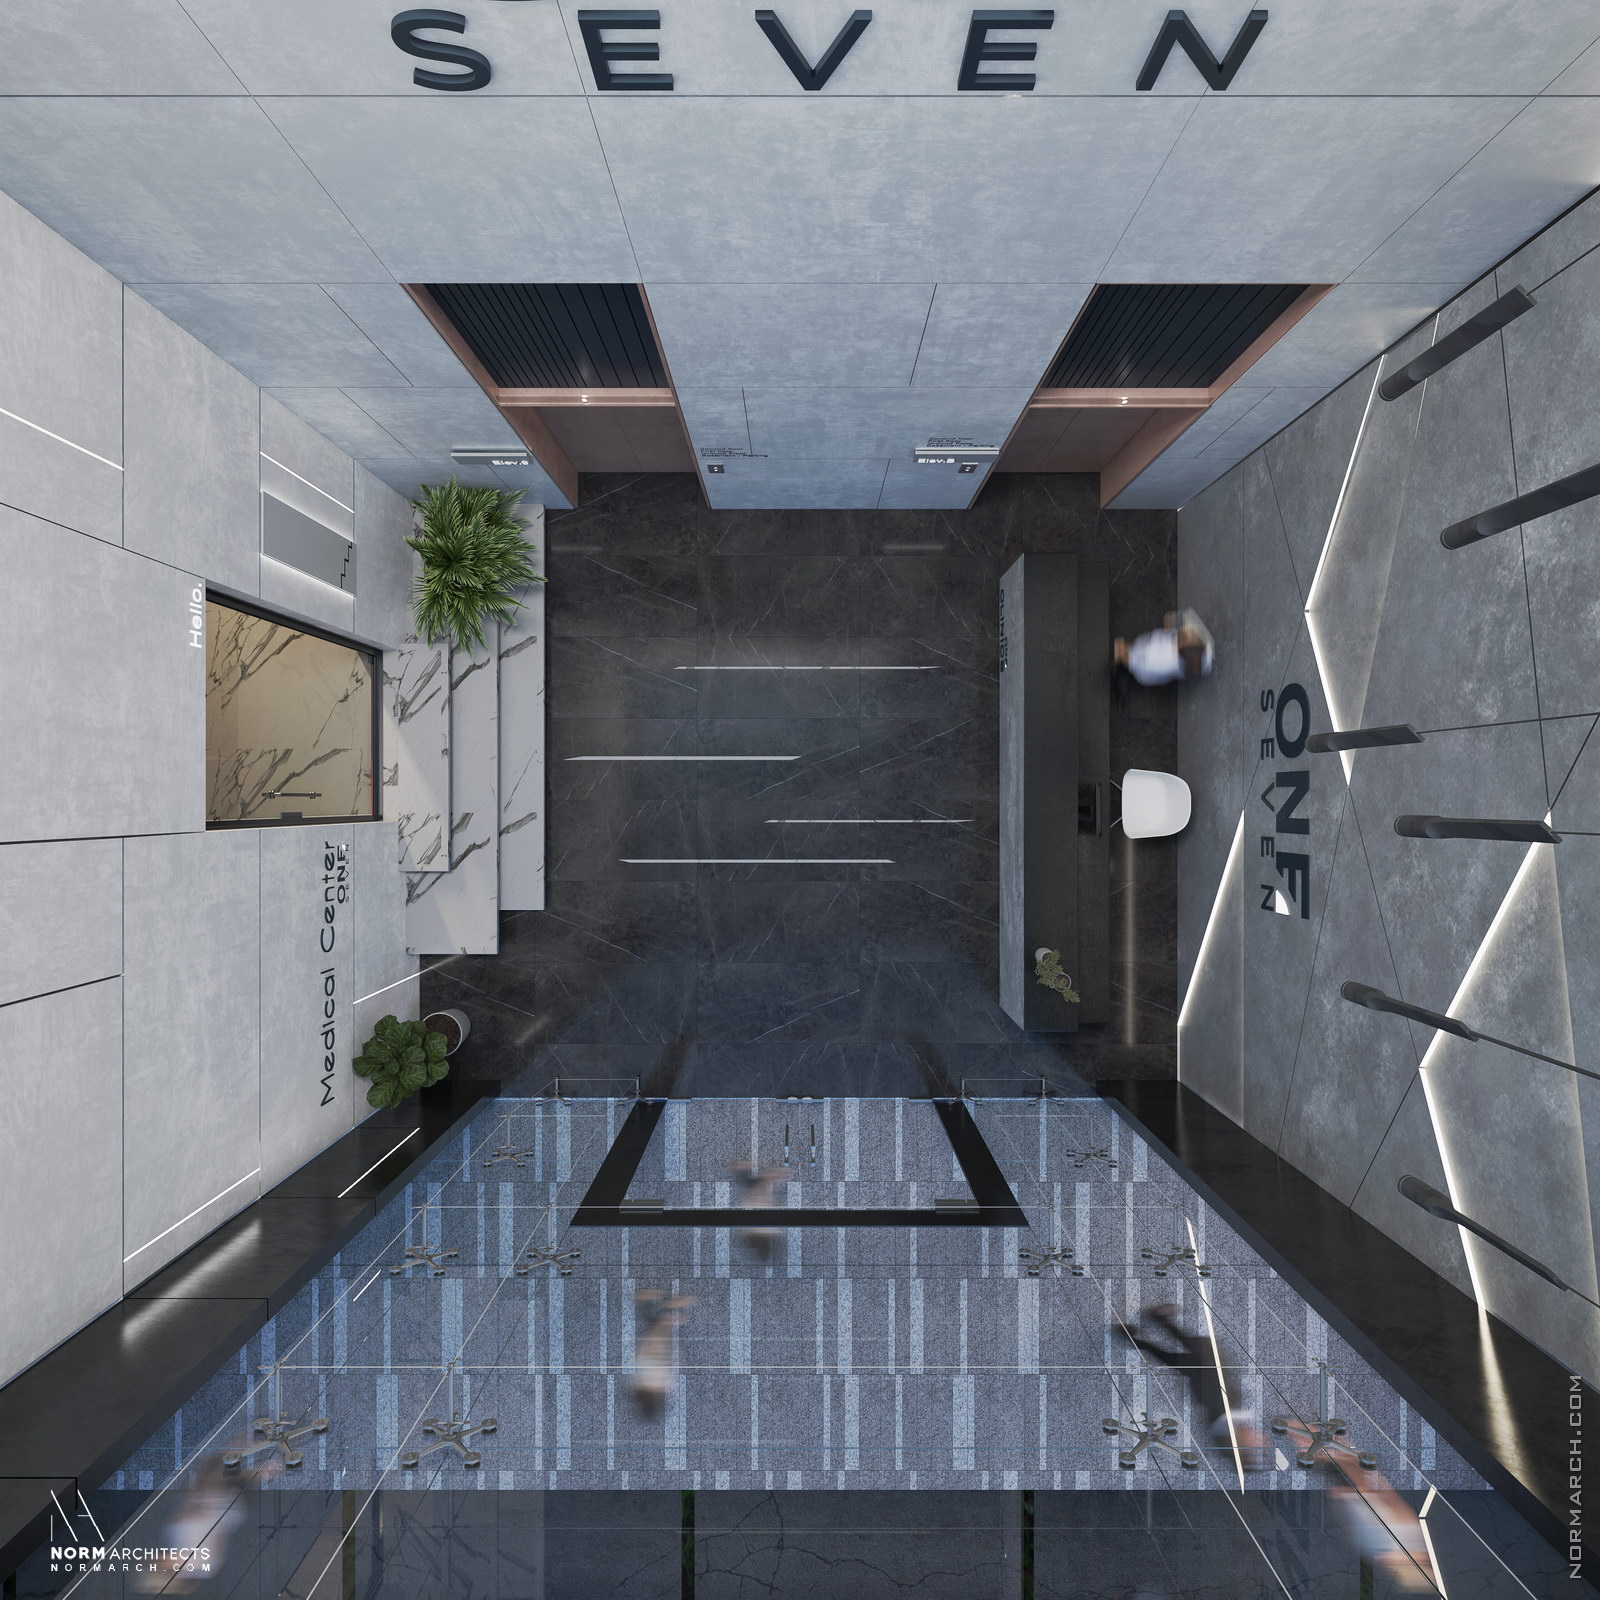 One Seven